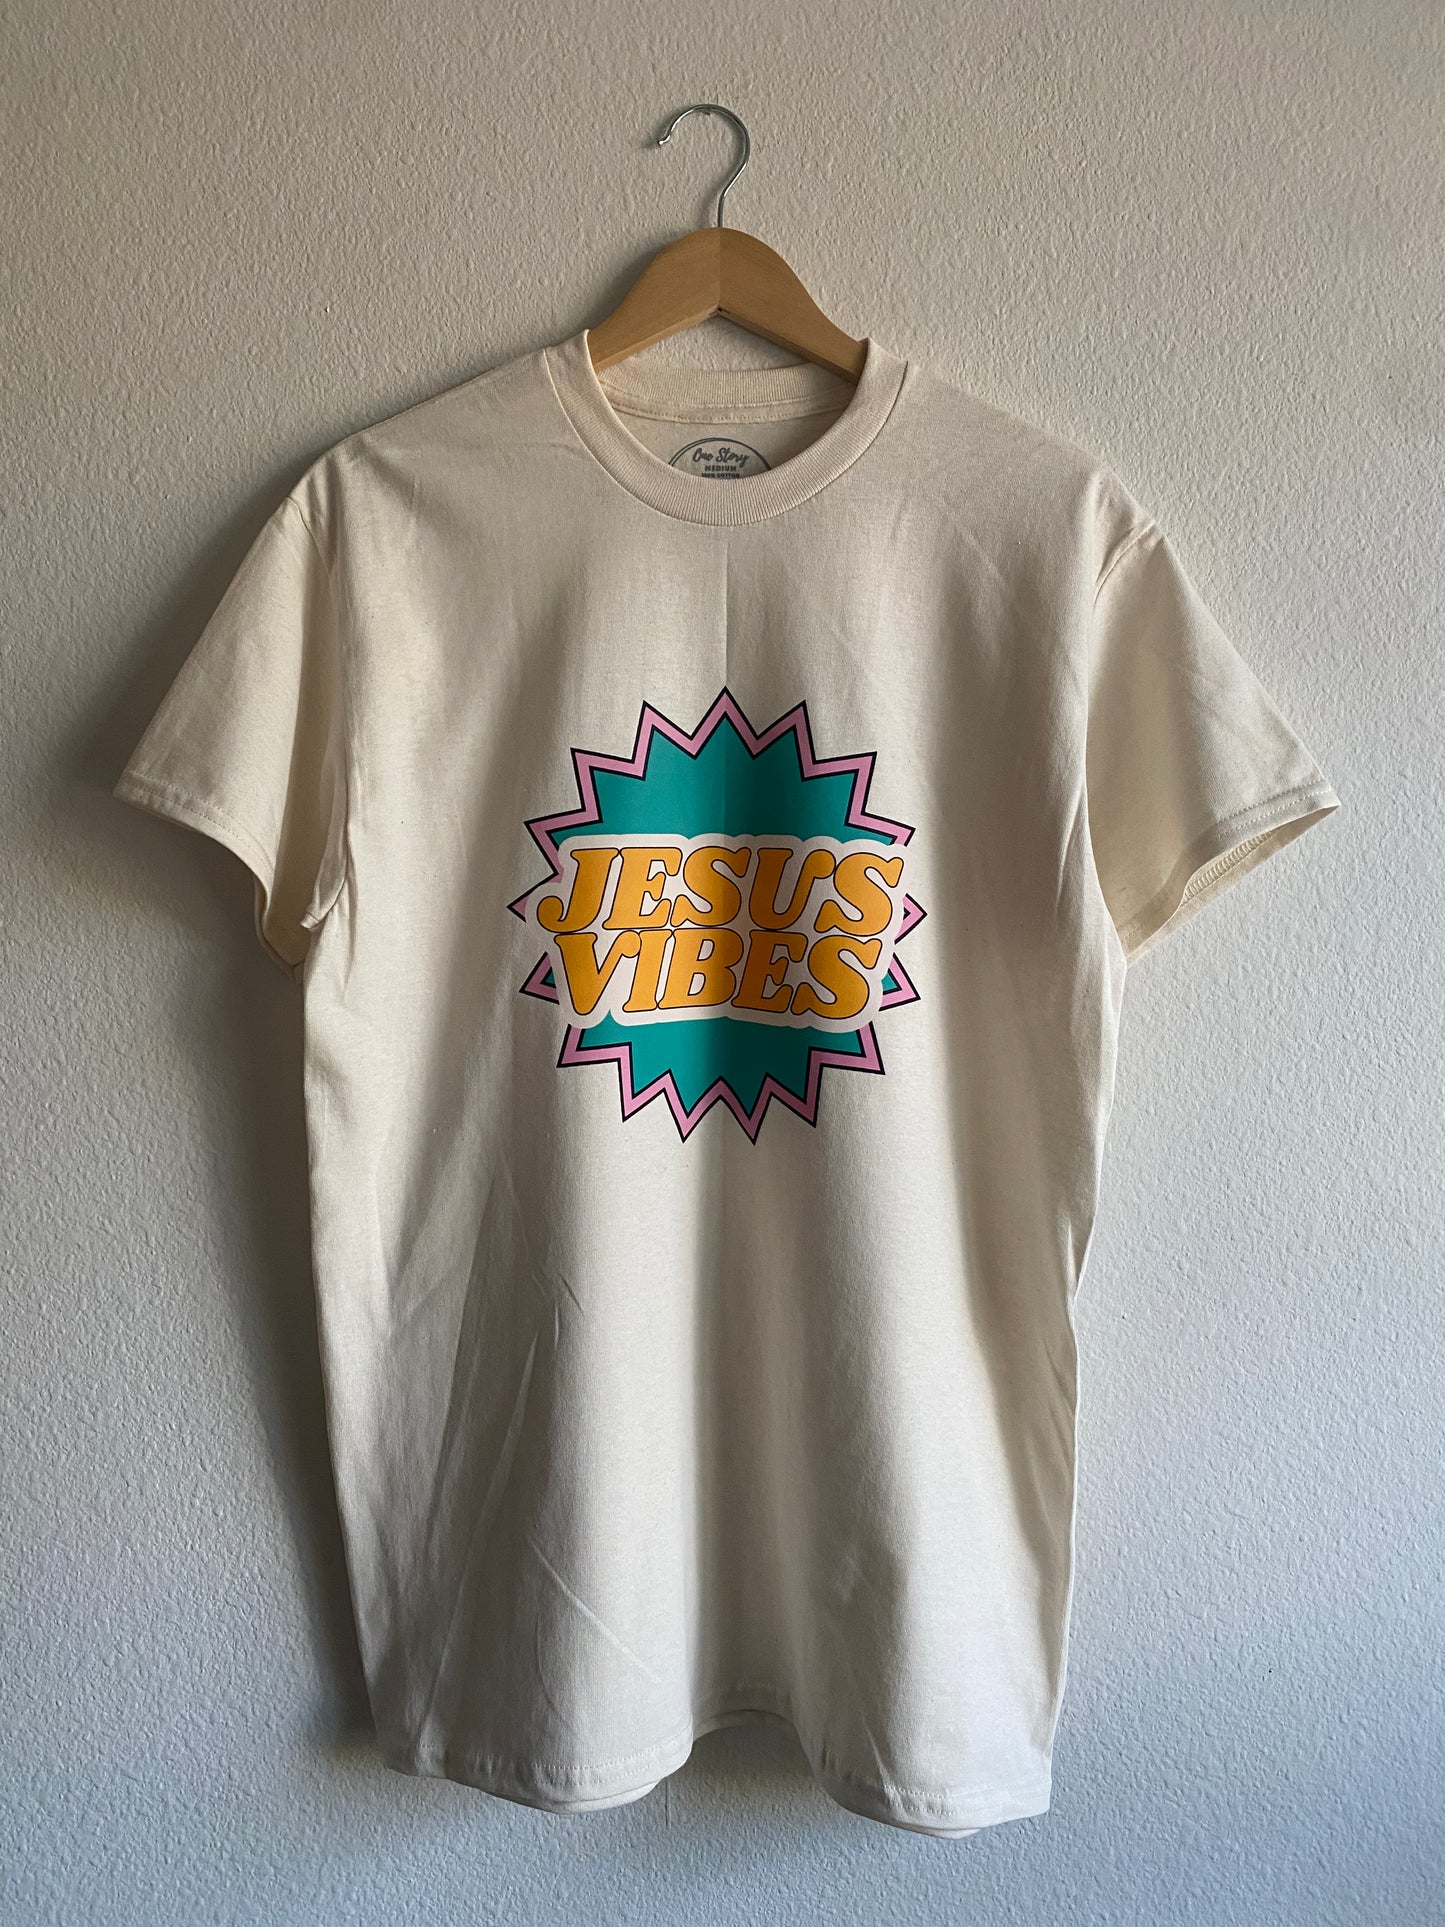 Jesus Vibes Pow Tee - Toddler/Youth